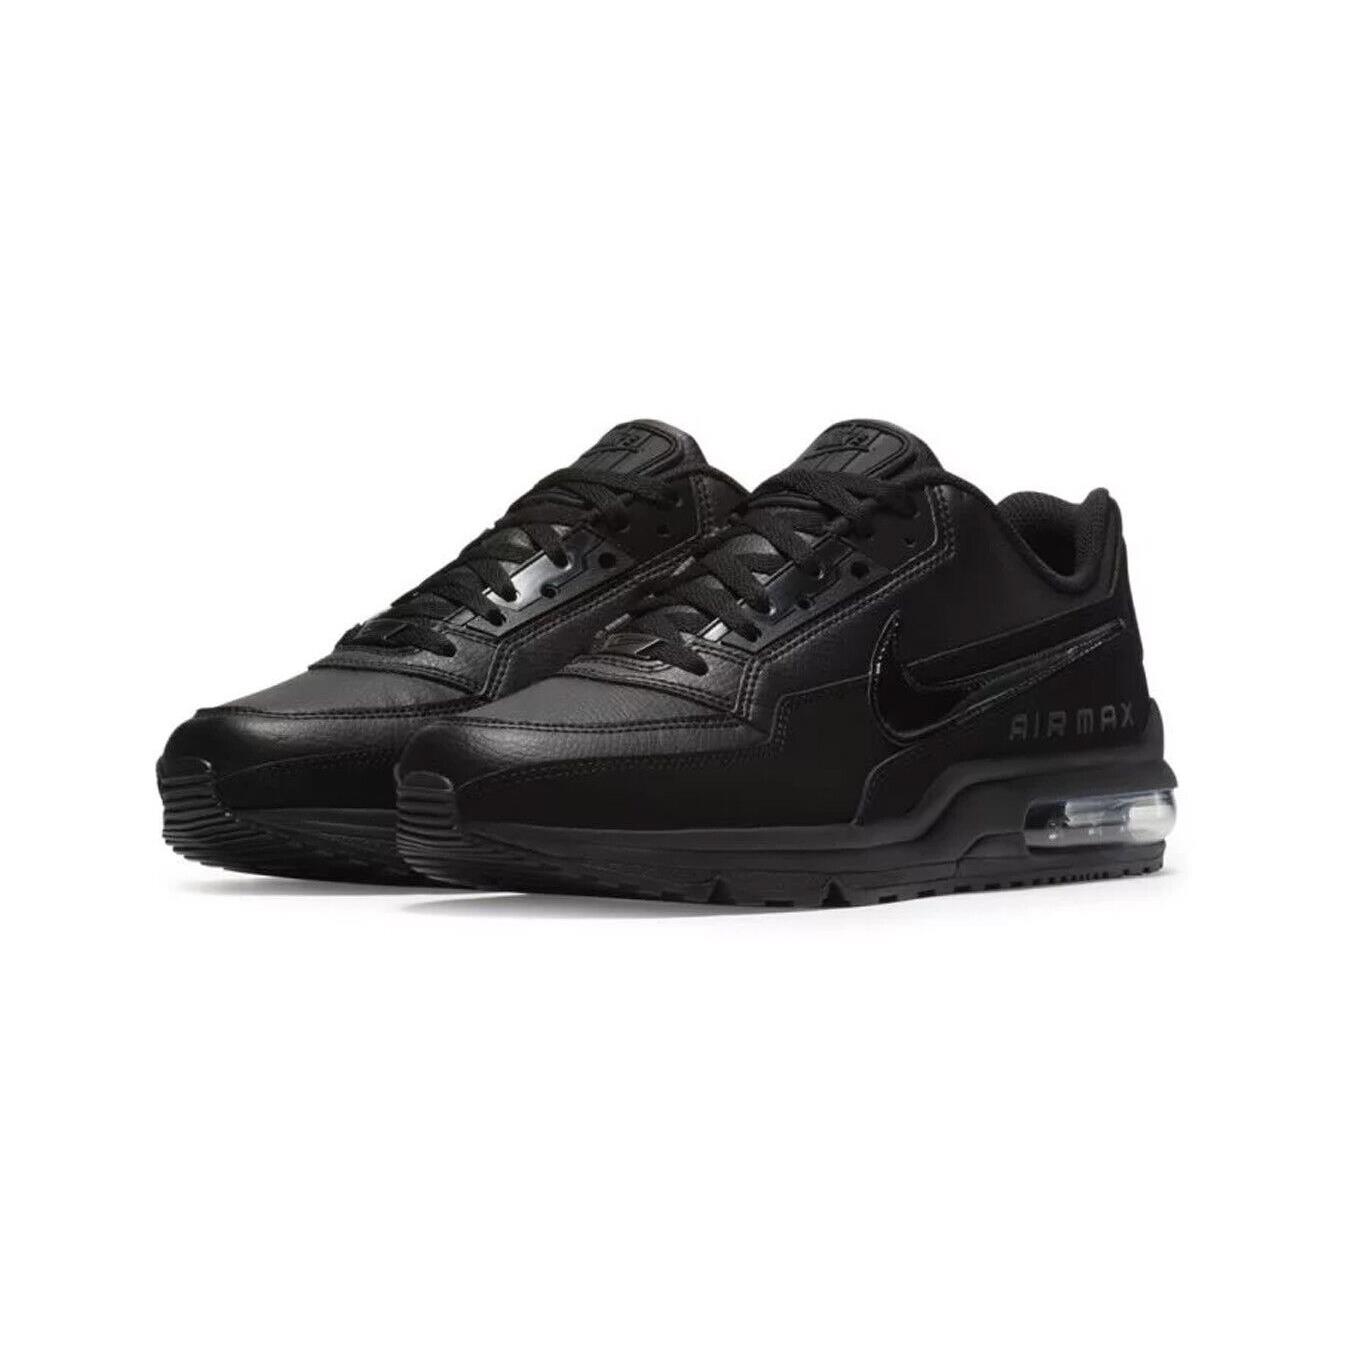 Nike Air Max Ltd 3 687977-020 Men`s Black Leather Running Sneakers Shoes HS874 10.5